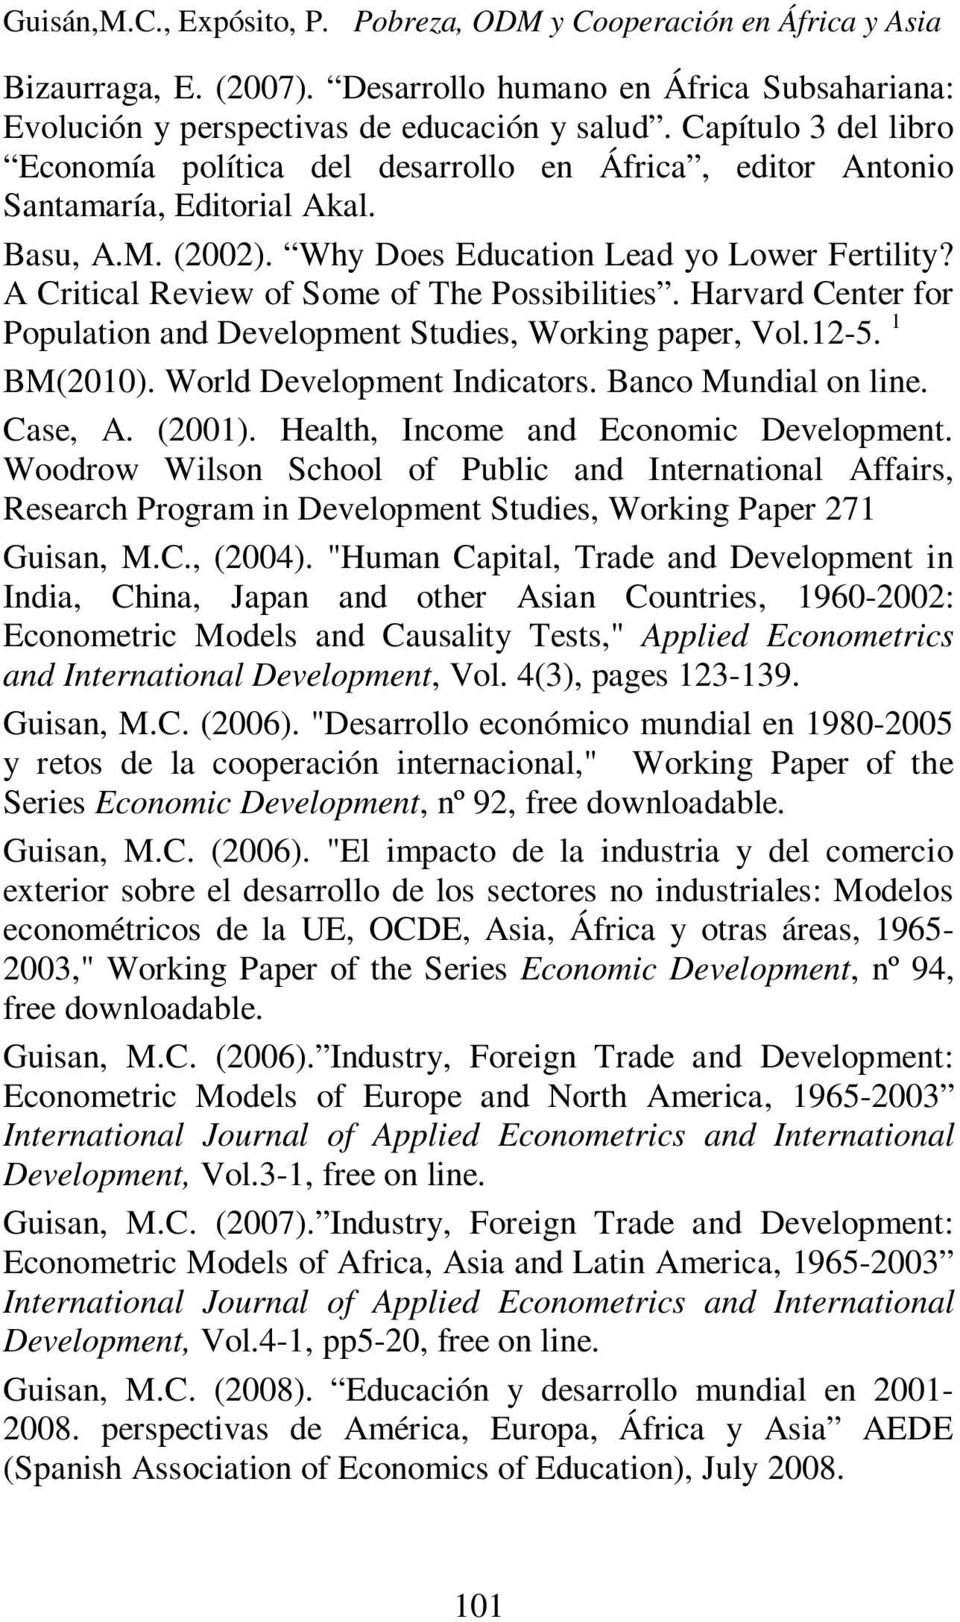 A Critical Review of Some of The Possibilities. Harvard Center for Population and Development Studies, Working paper, Vol.12-5. 1 BM(2010). World Development Indicators. Banco Mundial on line.